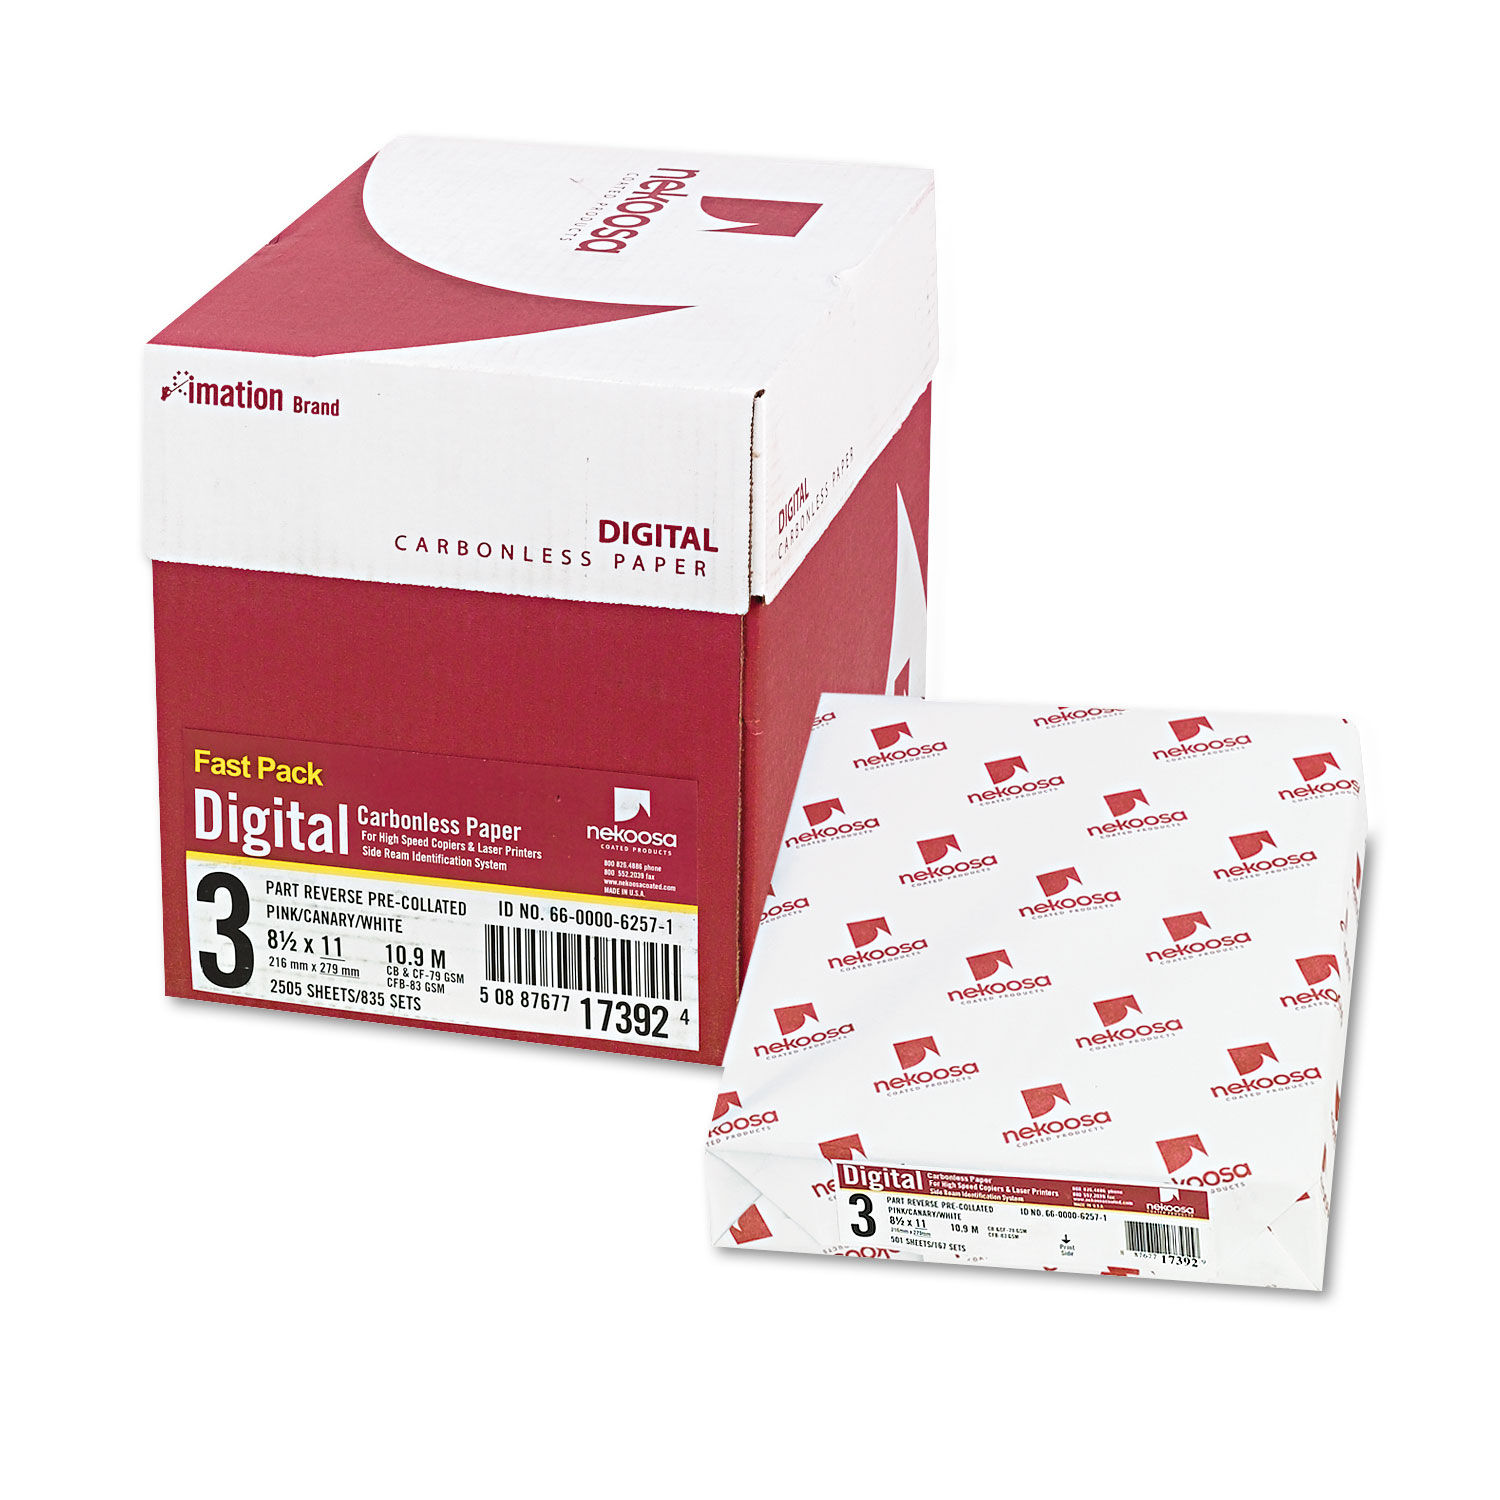 Fast Pack Digital Carbonless Paper 8-1/2 x 11, Pink/Canary/White, 2500/Carton